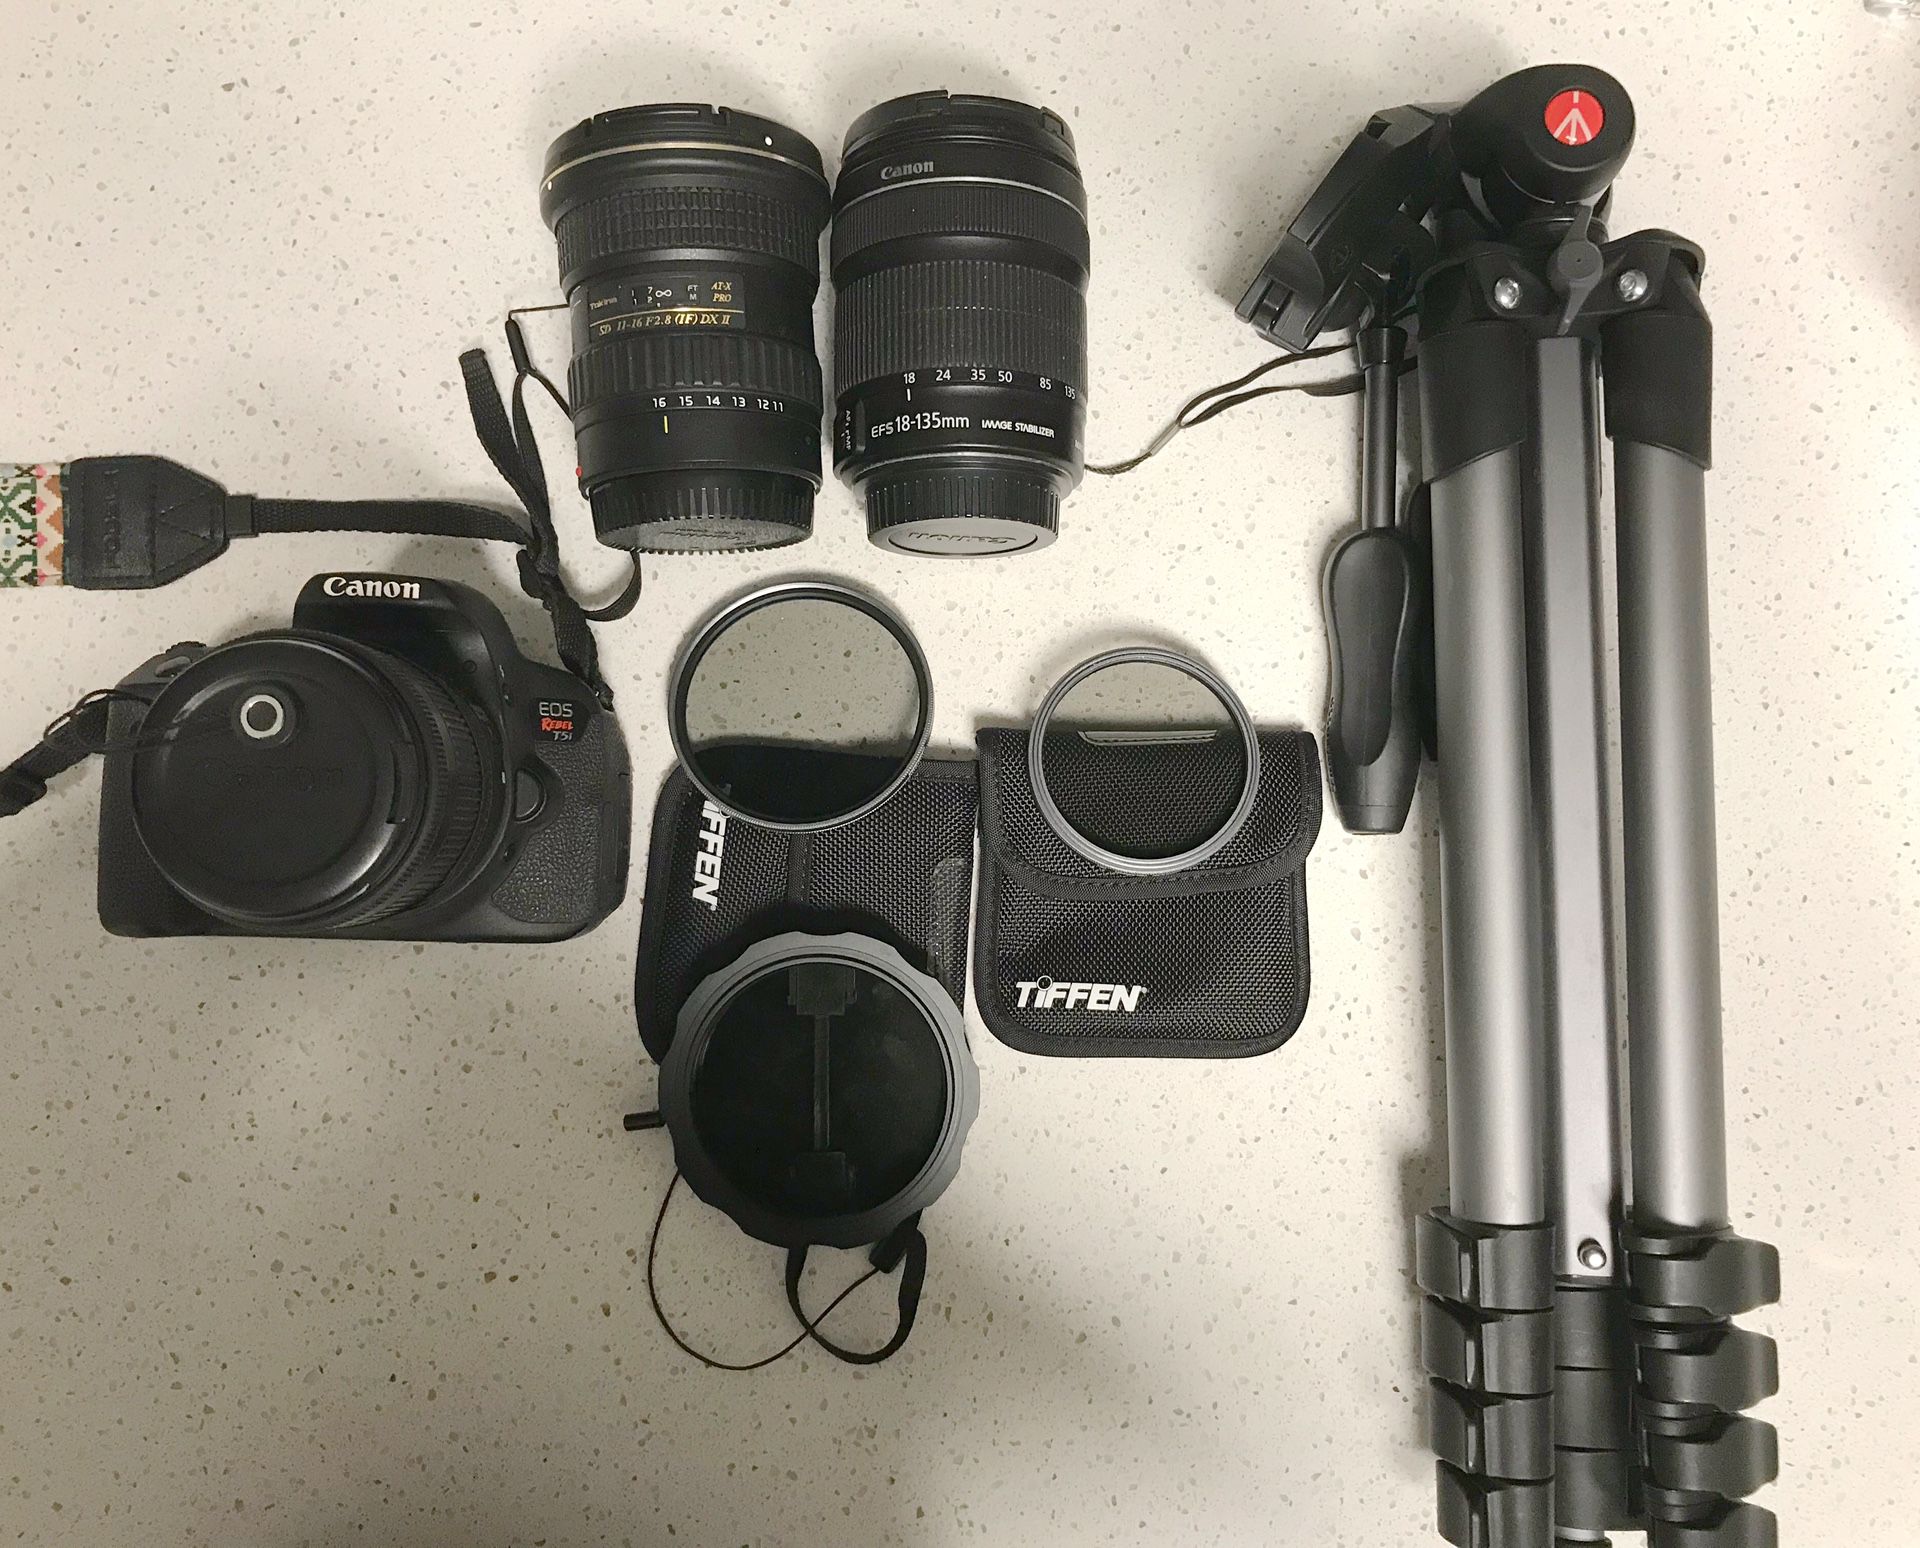 Canon Camera and Equipment (buy together or separate)